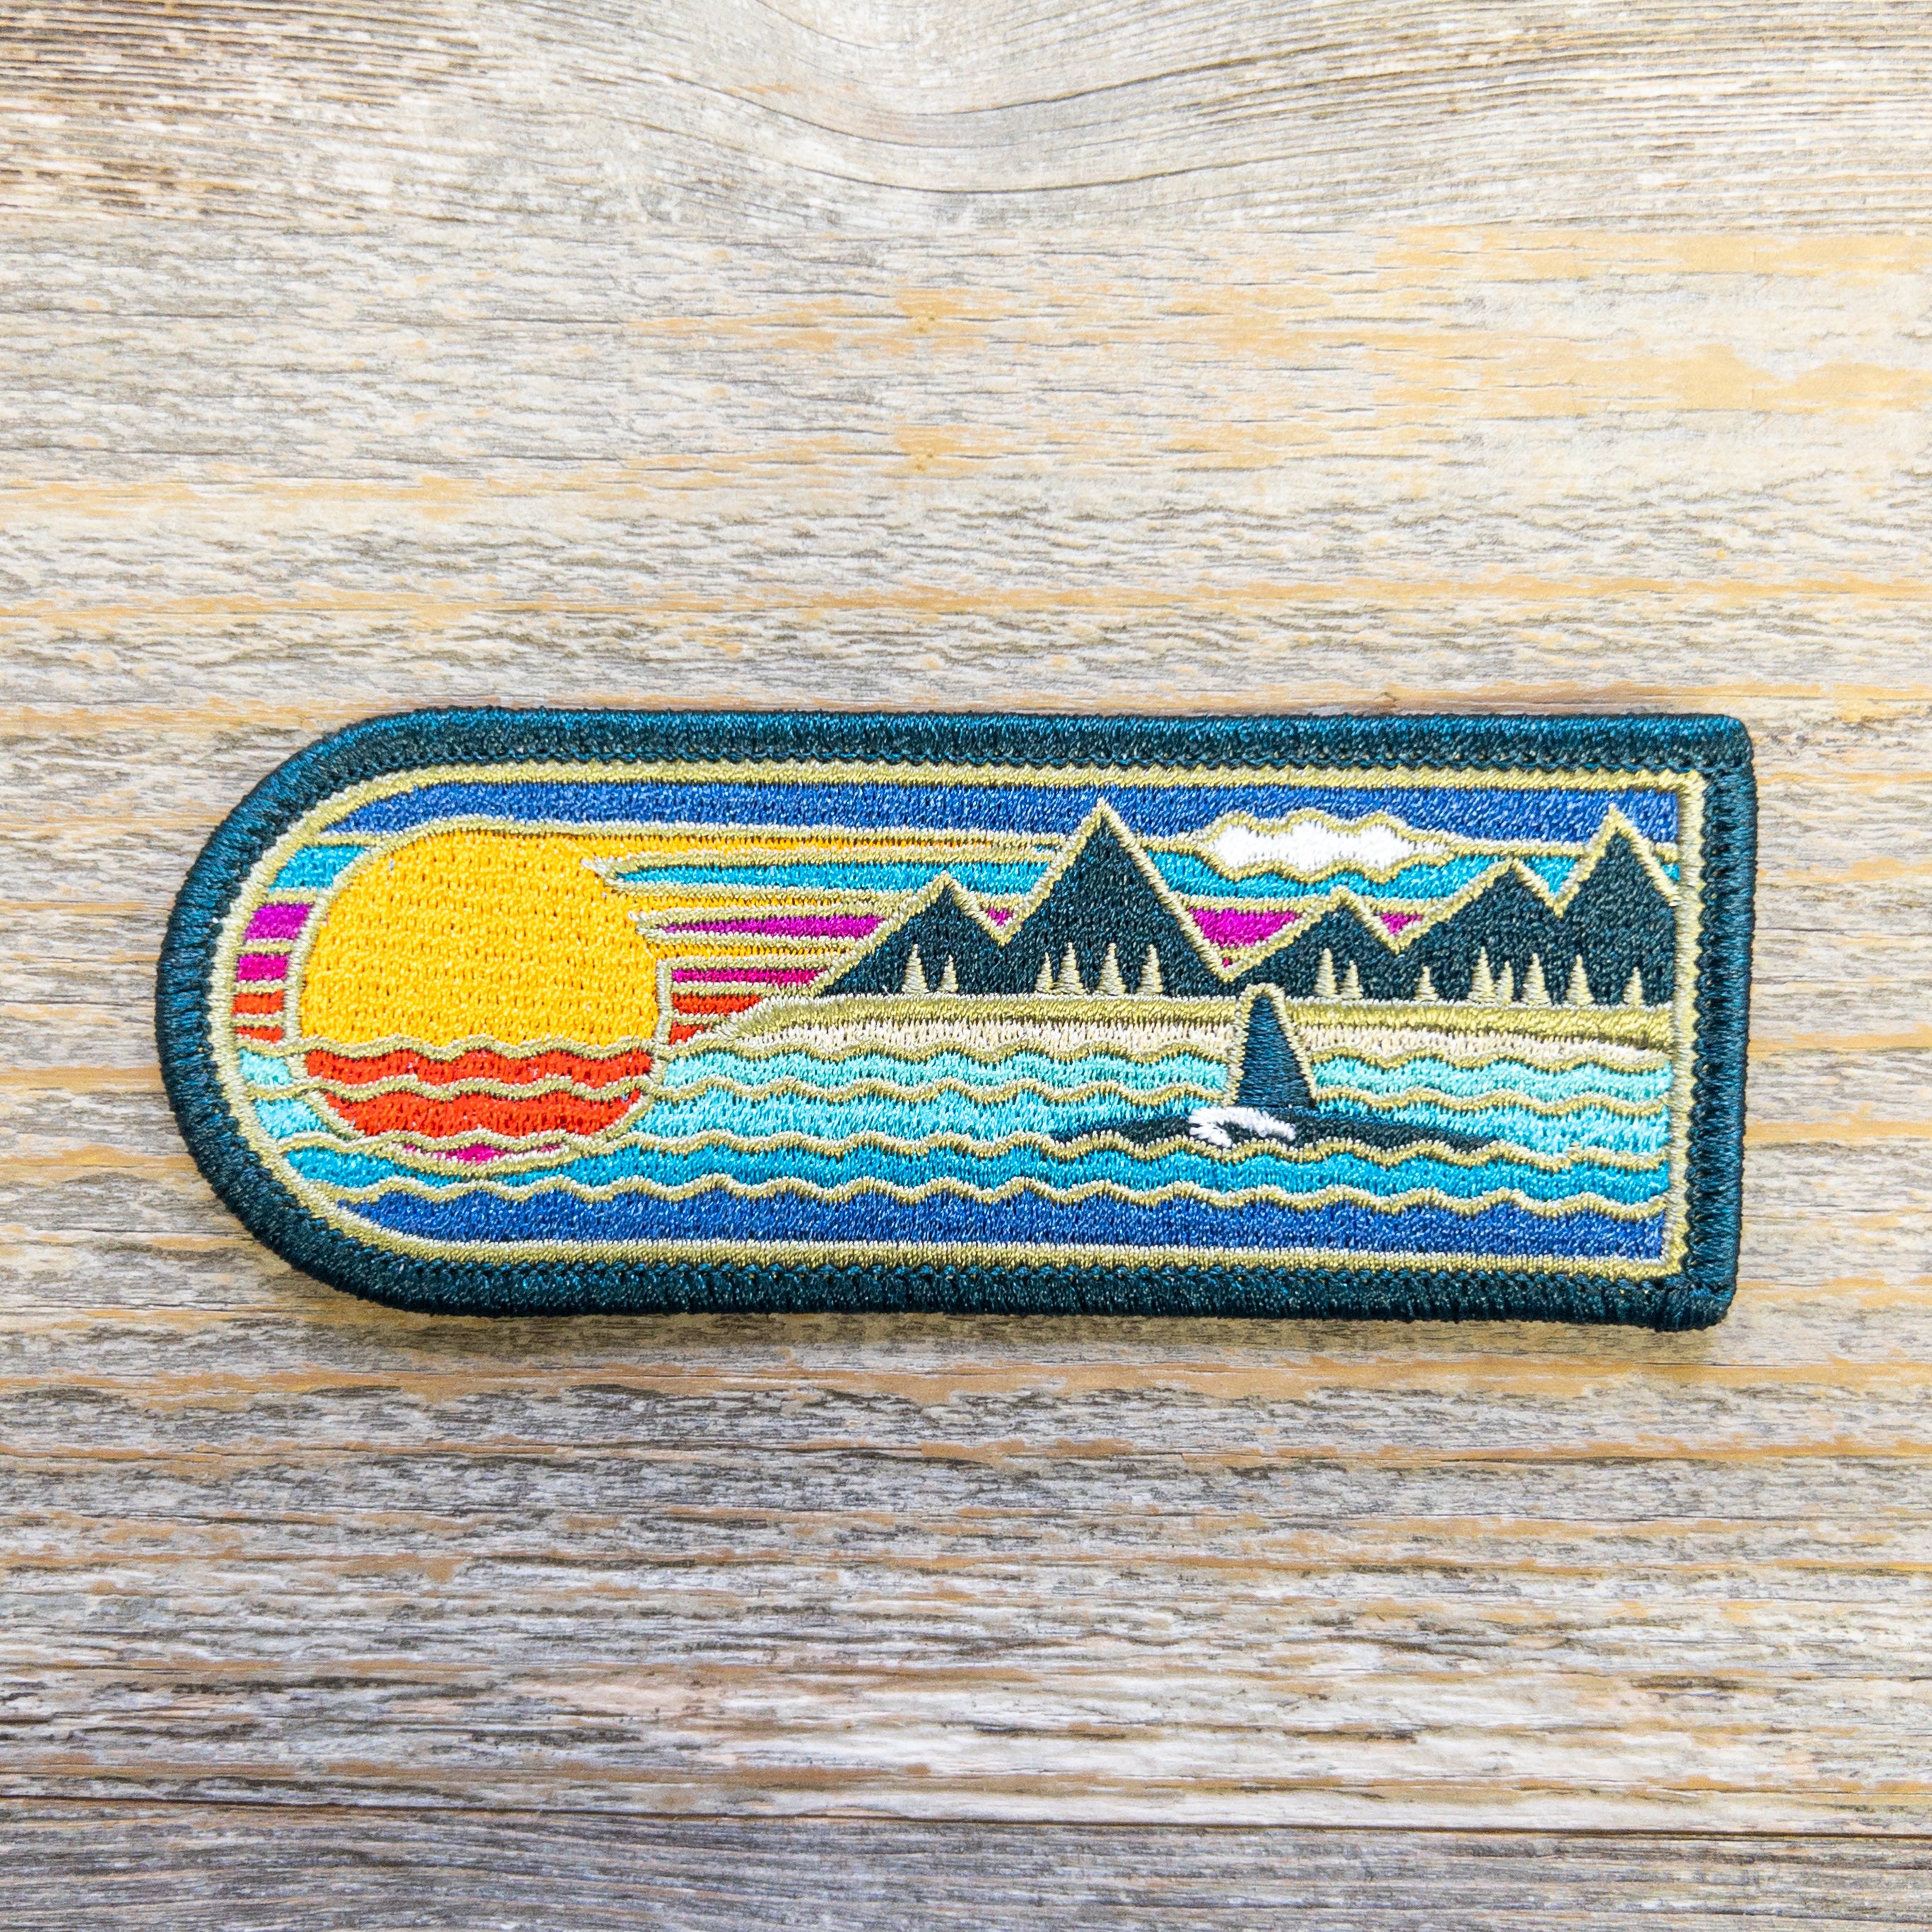 Bough & Antler "Orca Sunset" Patch